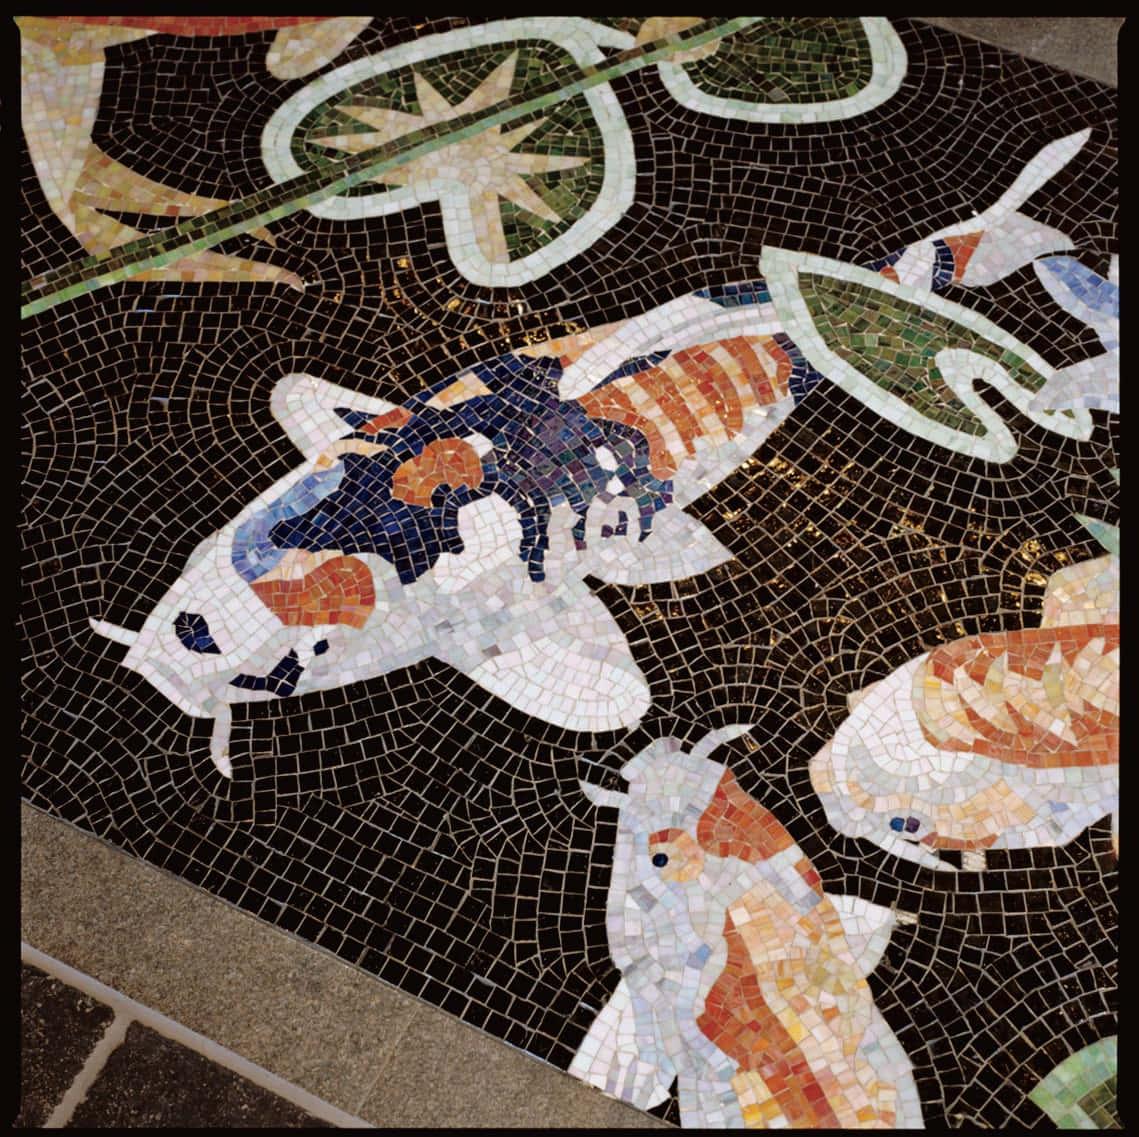 A Tile Floor With Koi Fish